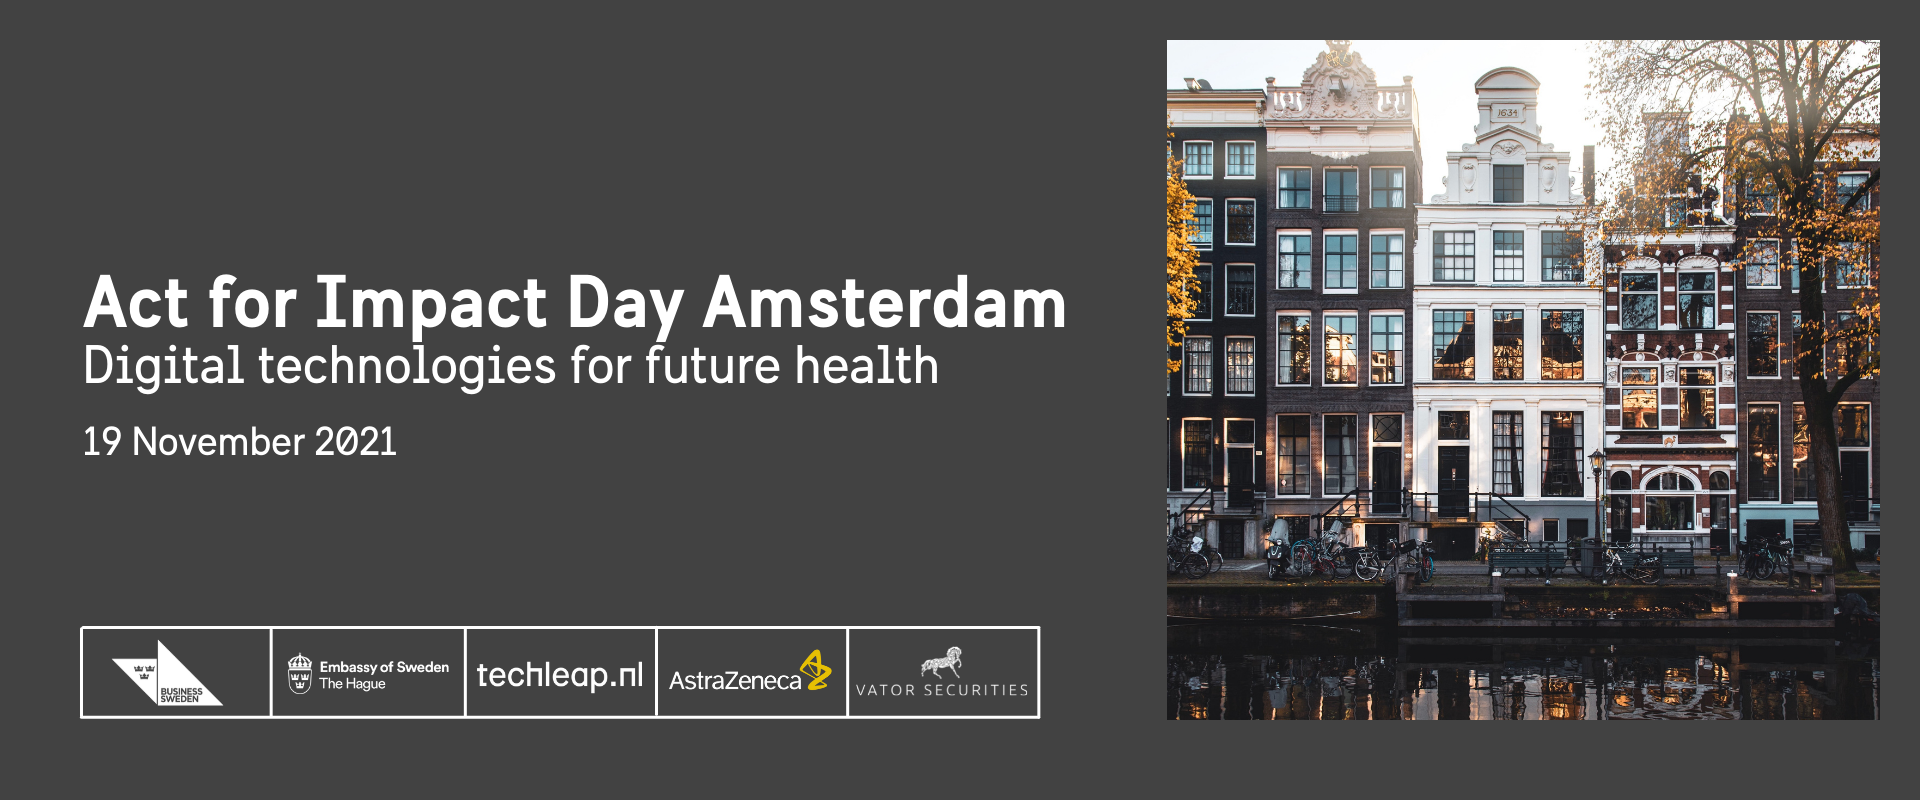 Header image for Act for Impact Day Amsterdam